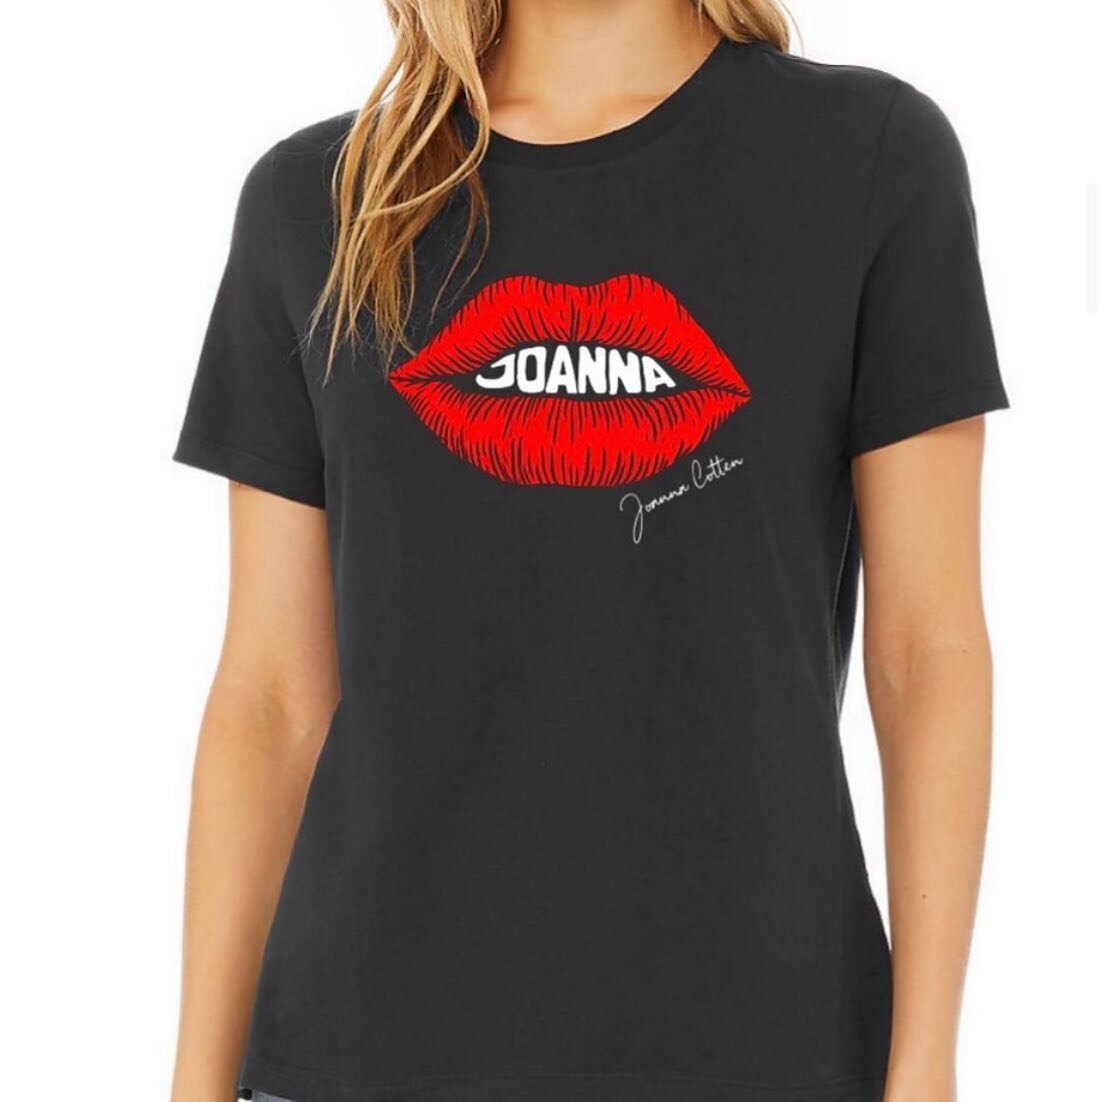 Hey Omaha! The Joanna lips shirt is available at the main merchandise stand which is at the top of the stairs upon entry to the arena between section 120-121. They will be available in Des Moines as well and I&rsquo;ll let you know the exact section 